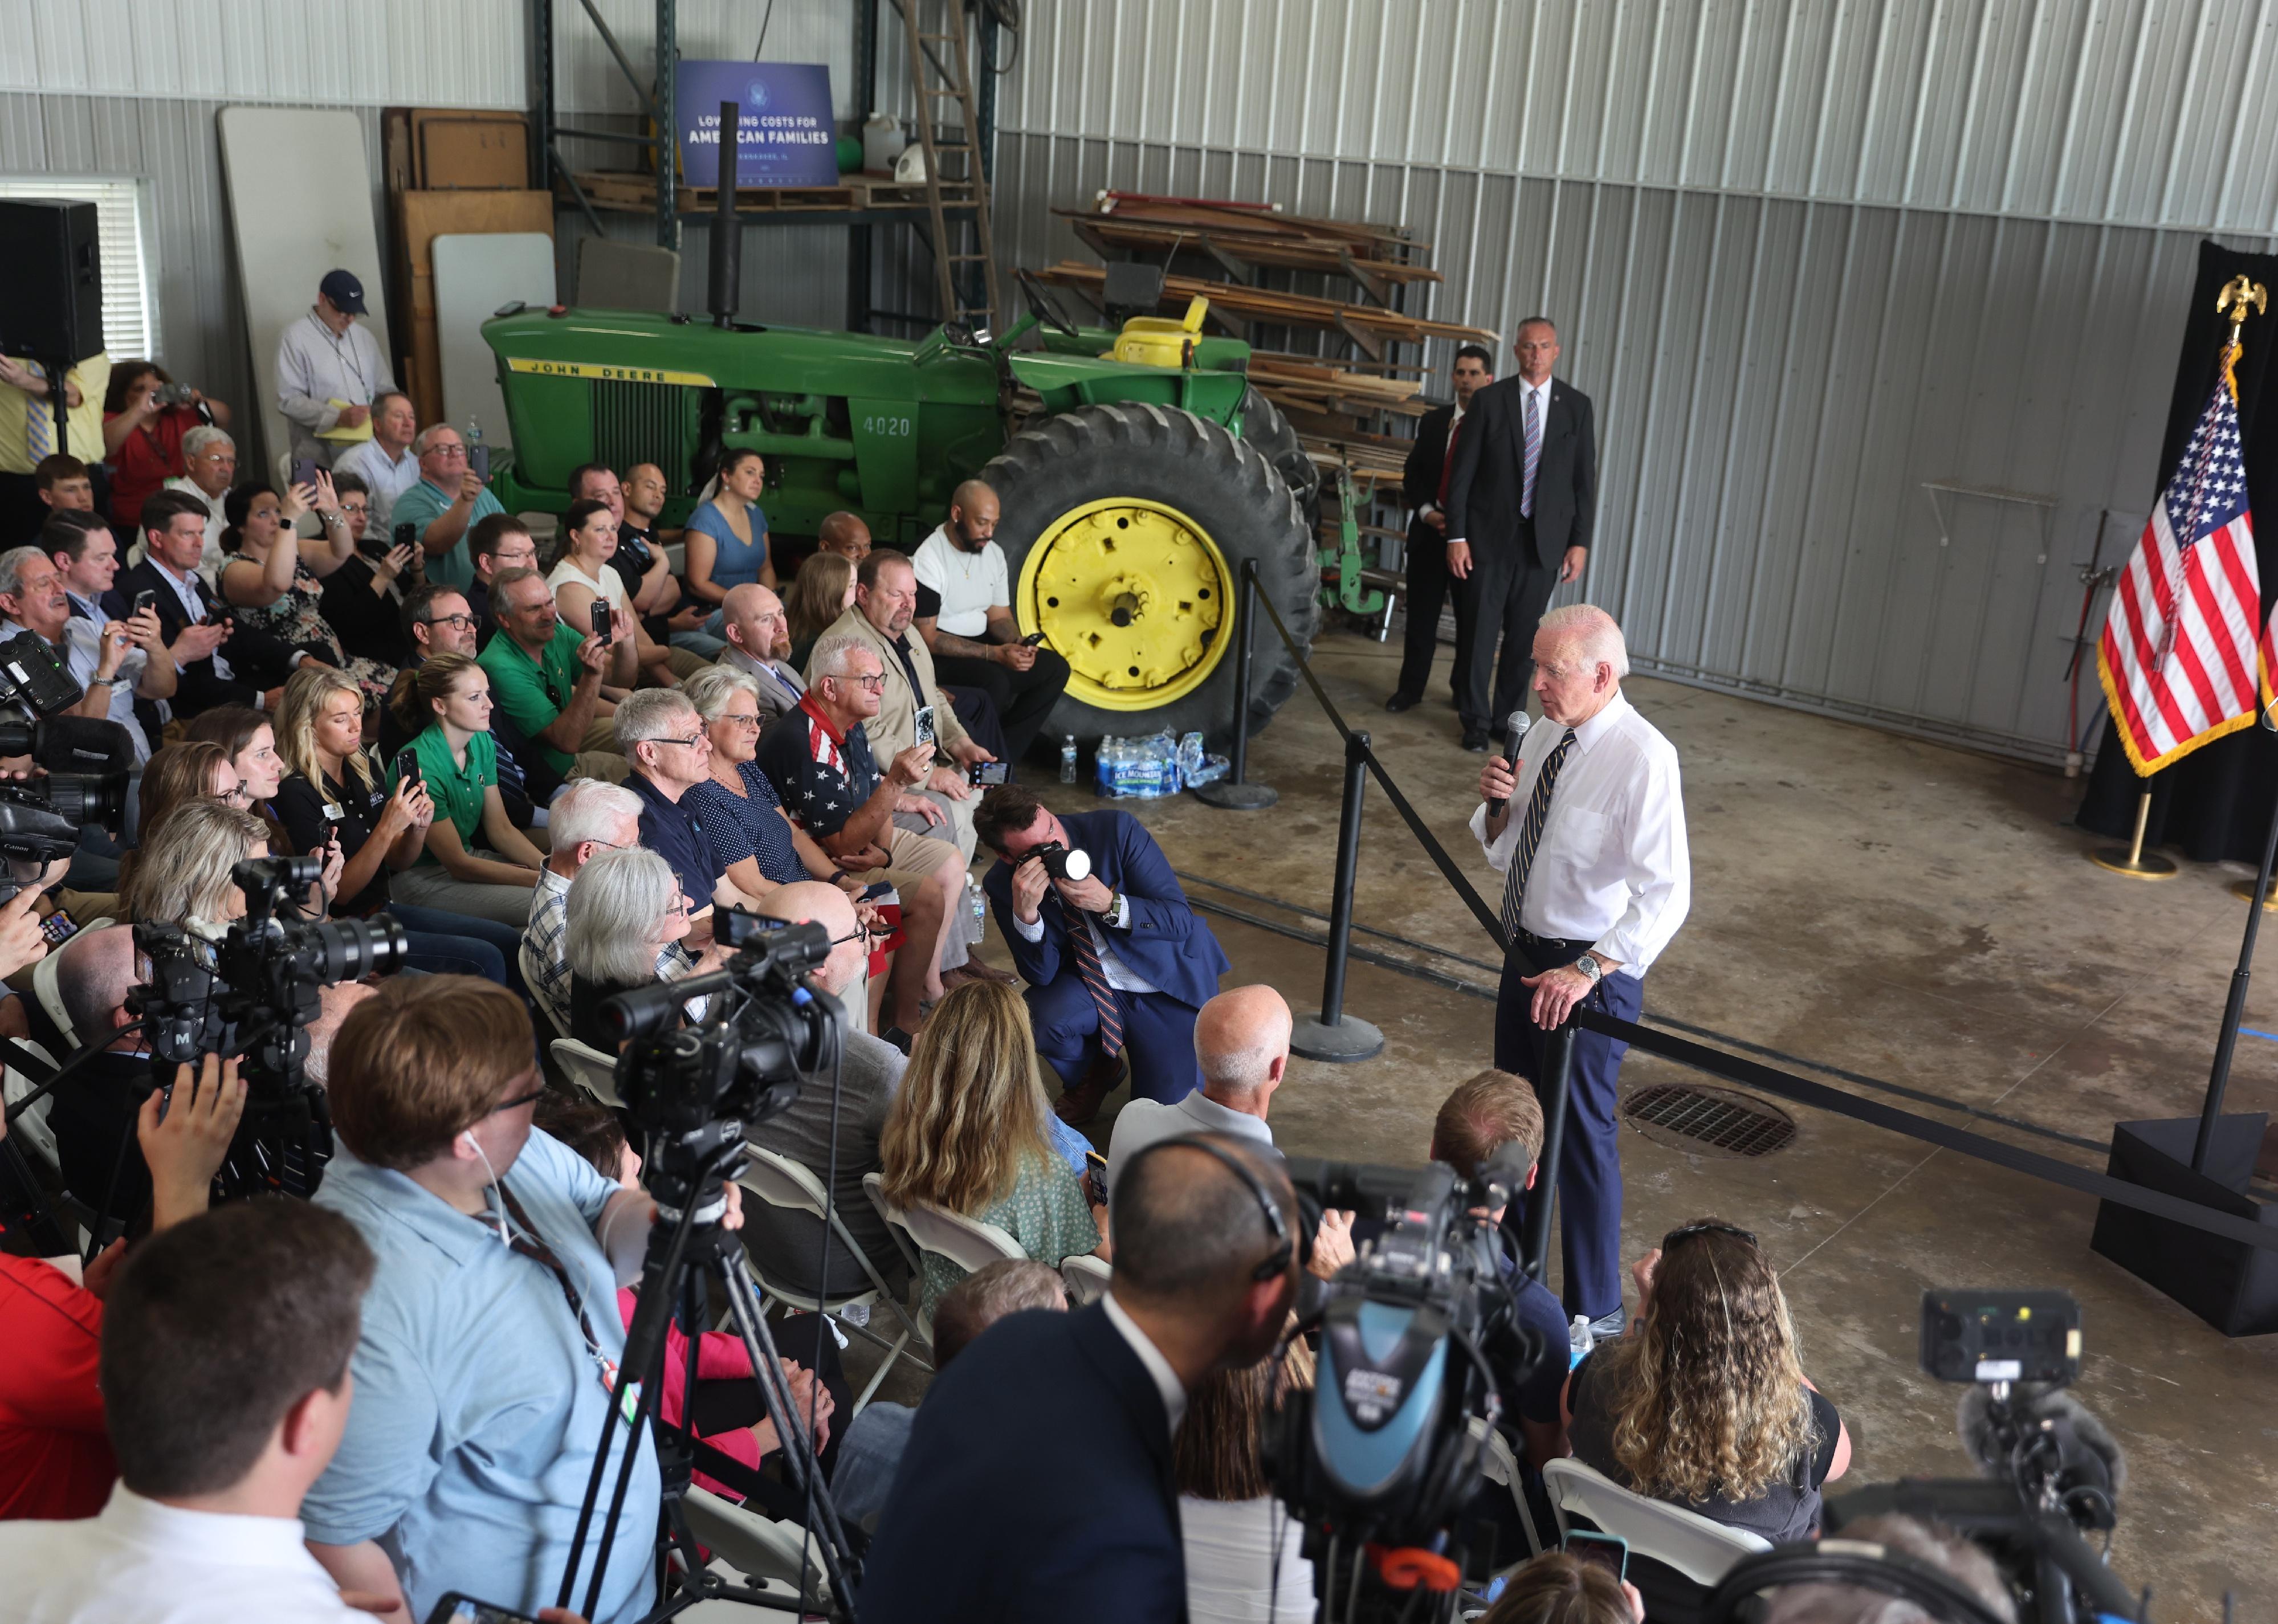 U.S. President Joe Biden speaks to guests gathered at the O'Connor Grain Farm in Kankakee, Illinois.